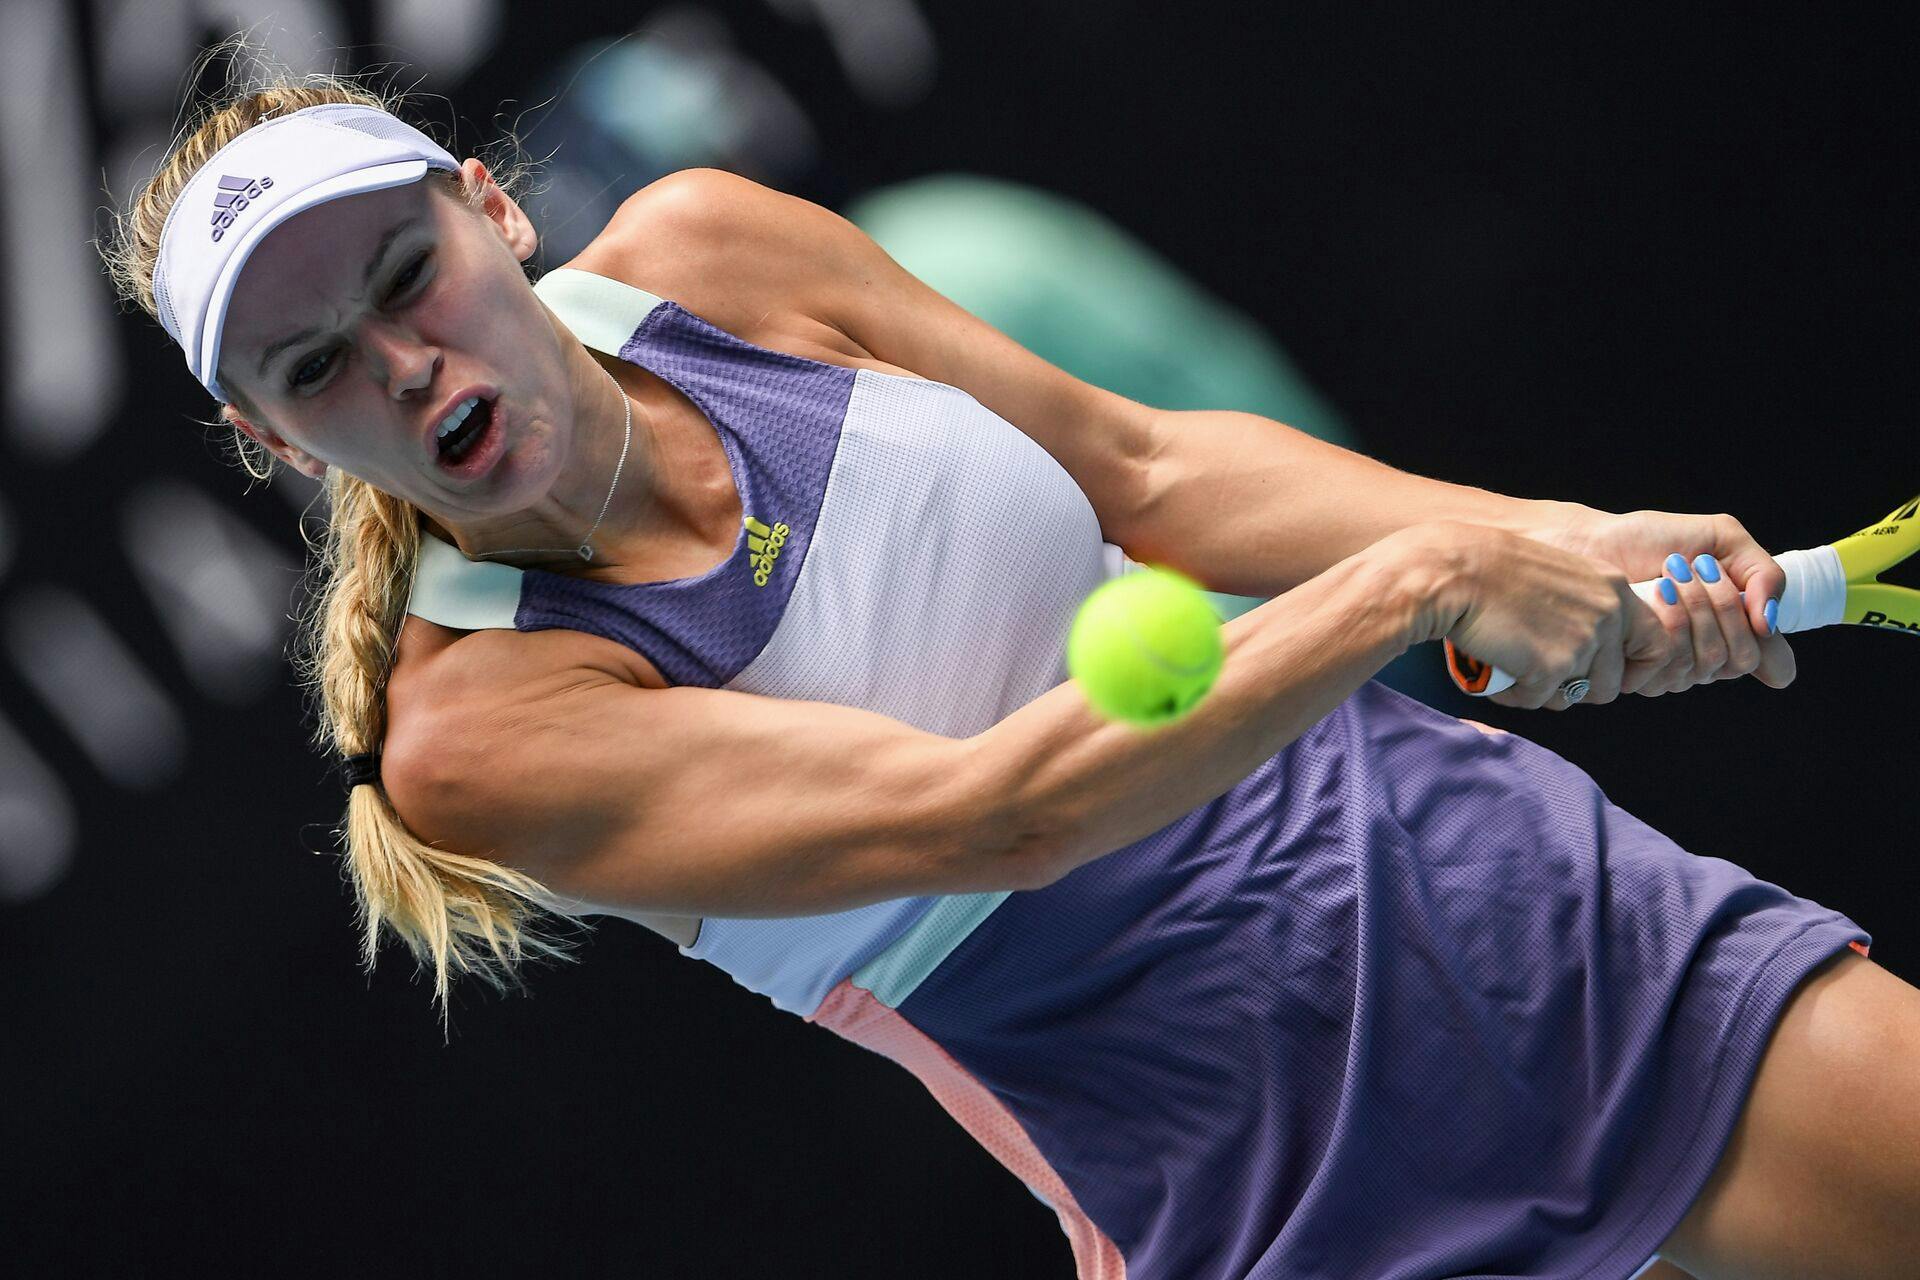 Denmark's Caroline Wozniacki hits a return against Tunisia's Ons Jabeur during their women's singles match on day five of the Australian Open tennis tournament in Melbourne on January 24, 2020. (Photo by Greg Wood / AFP) / IMAGE RESTRICTED TO EDITORIAL USE - STRICTLY NO COMMERCIAL USE